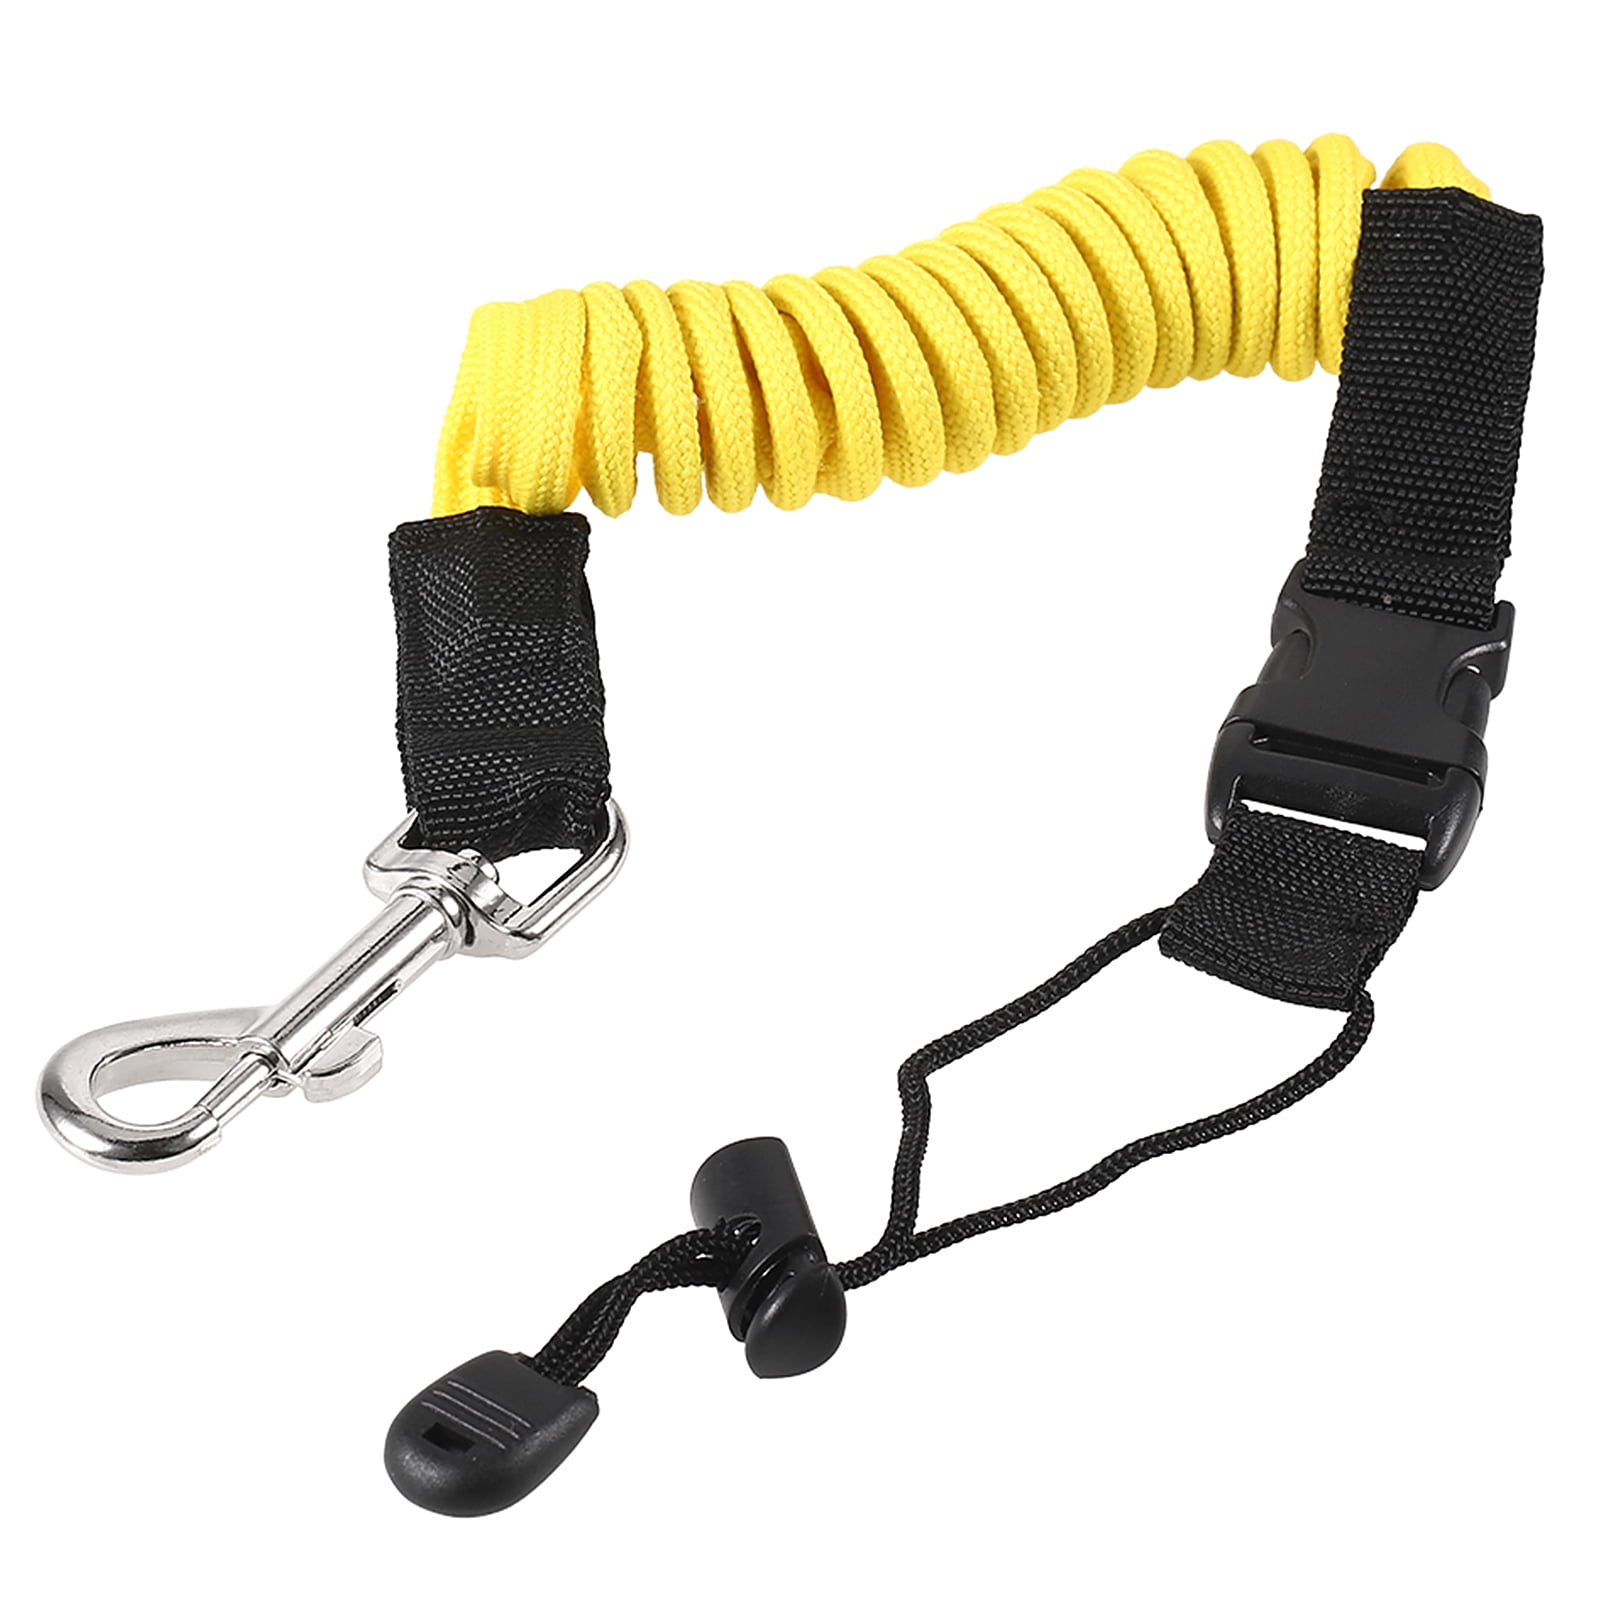 Kayak Boat Elastic Rope Safety Bungee Cord Rowing Canoe Lanyard Line Accessories 